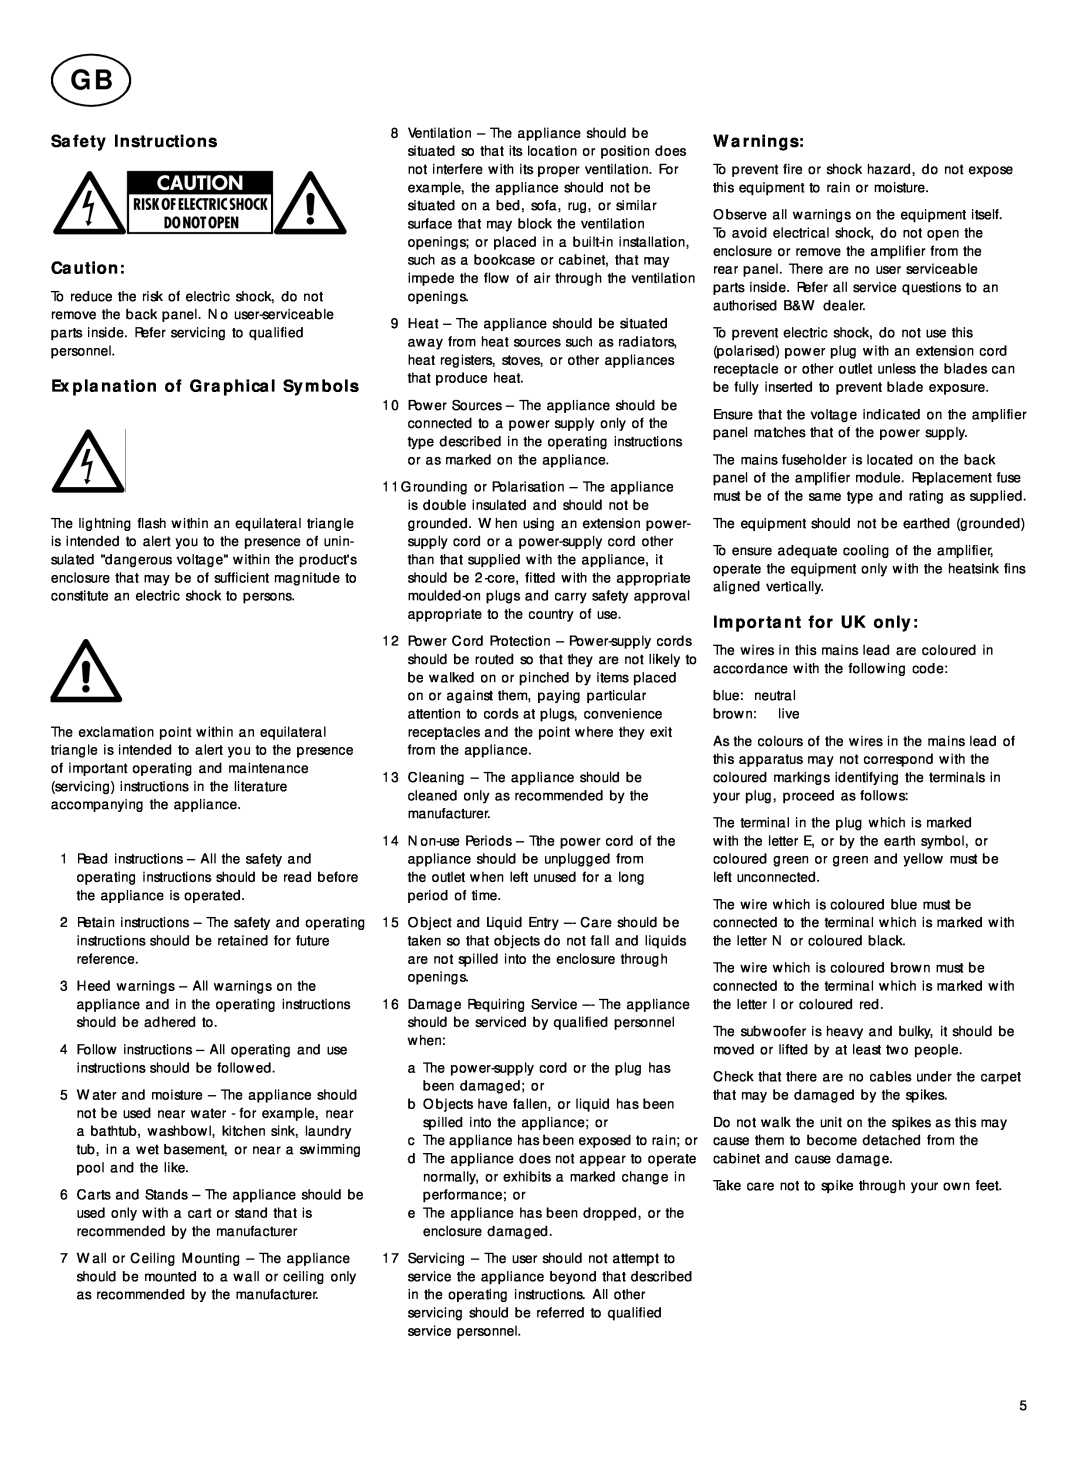 Bowers & Wilkins ASW2000 Safety Instructions, Explanation of Graphical Symbols, Warnings, Important for UK only 